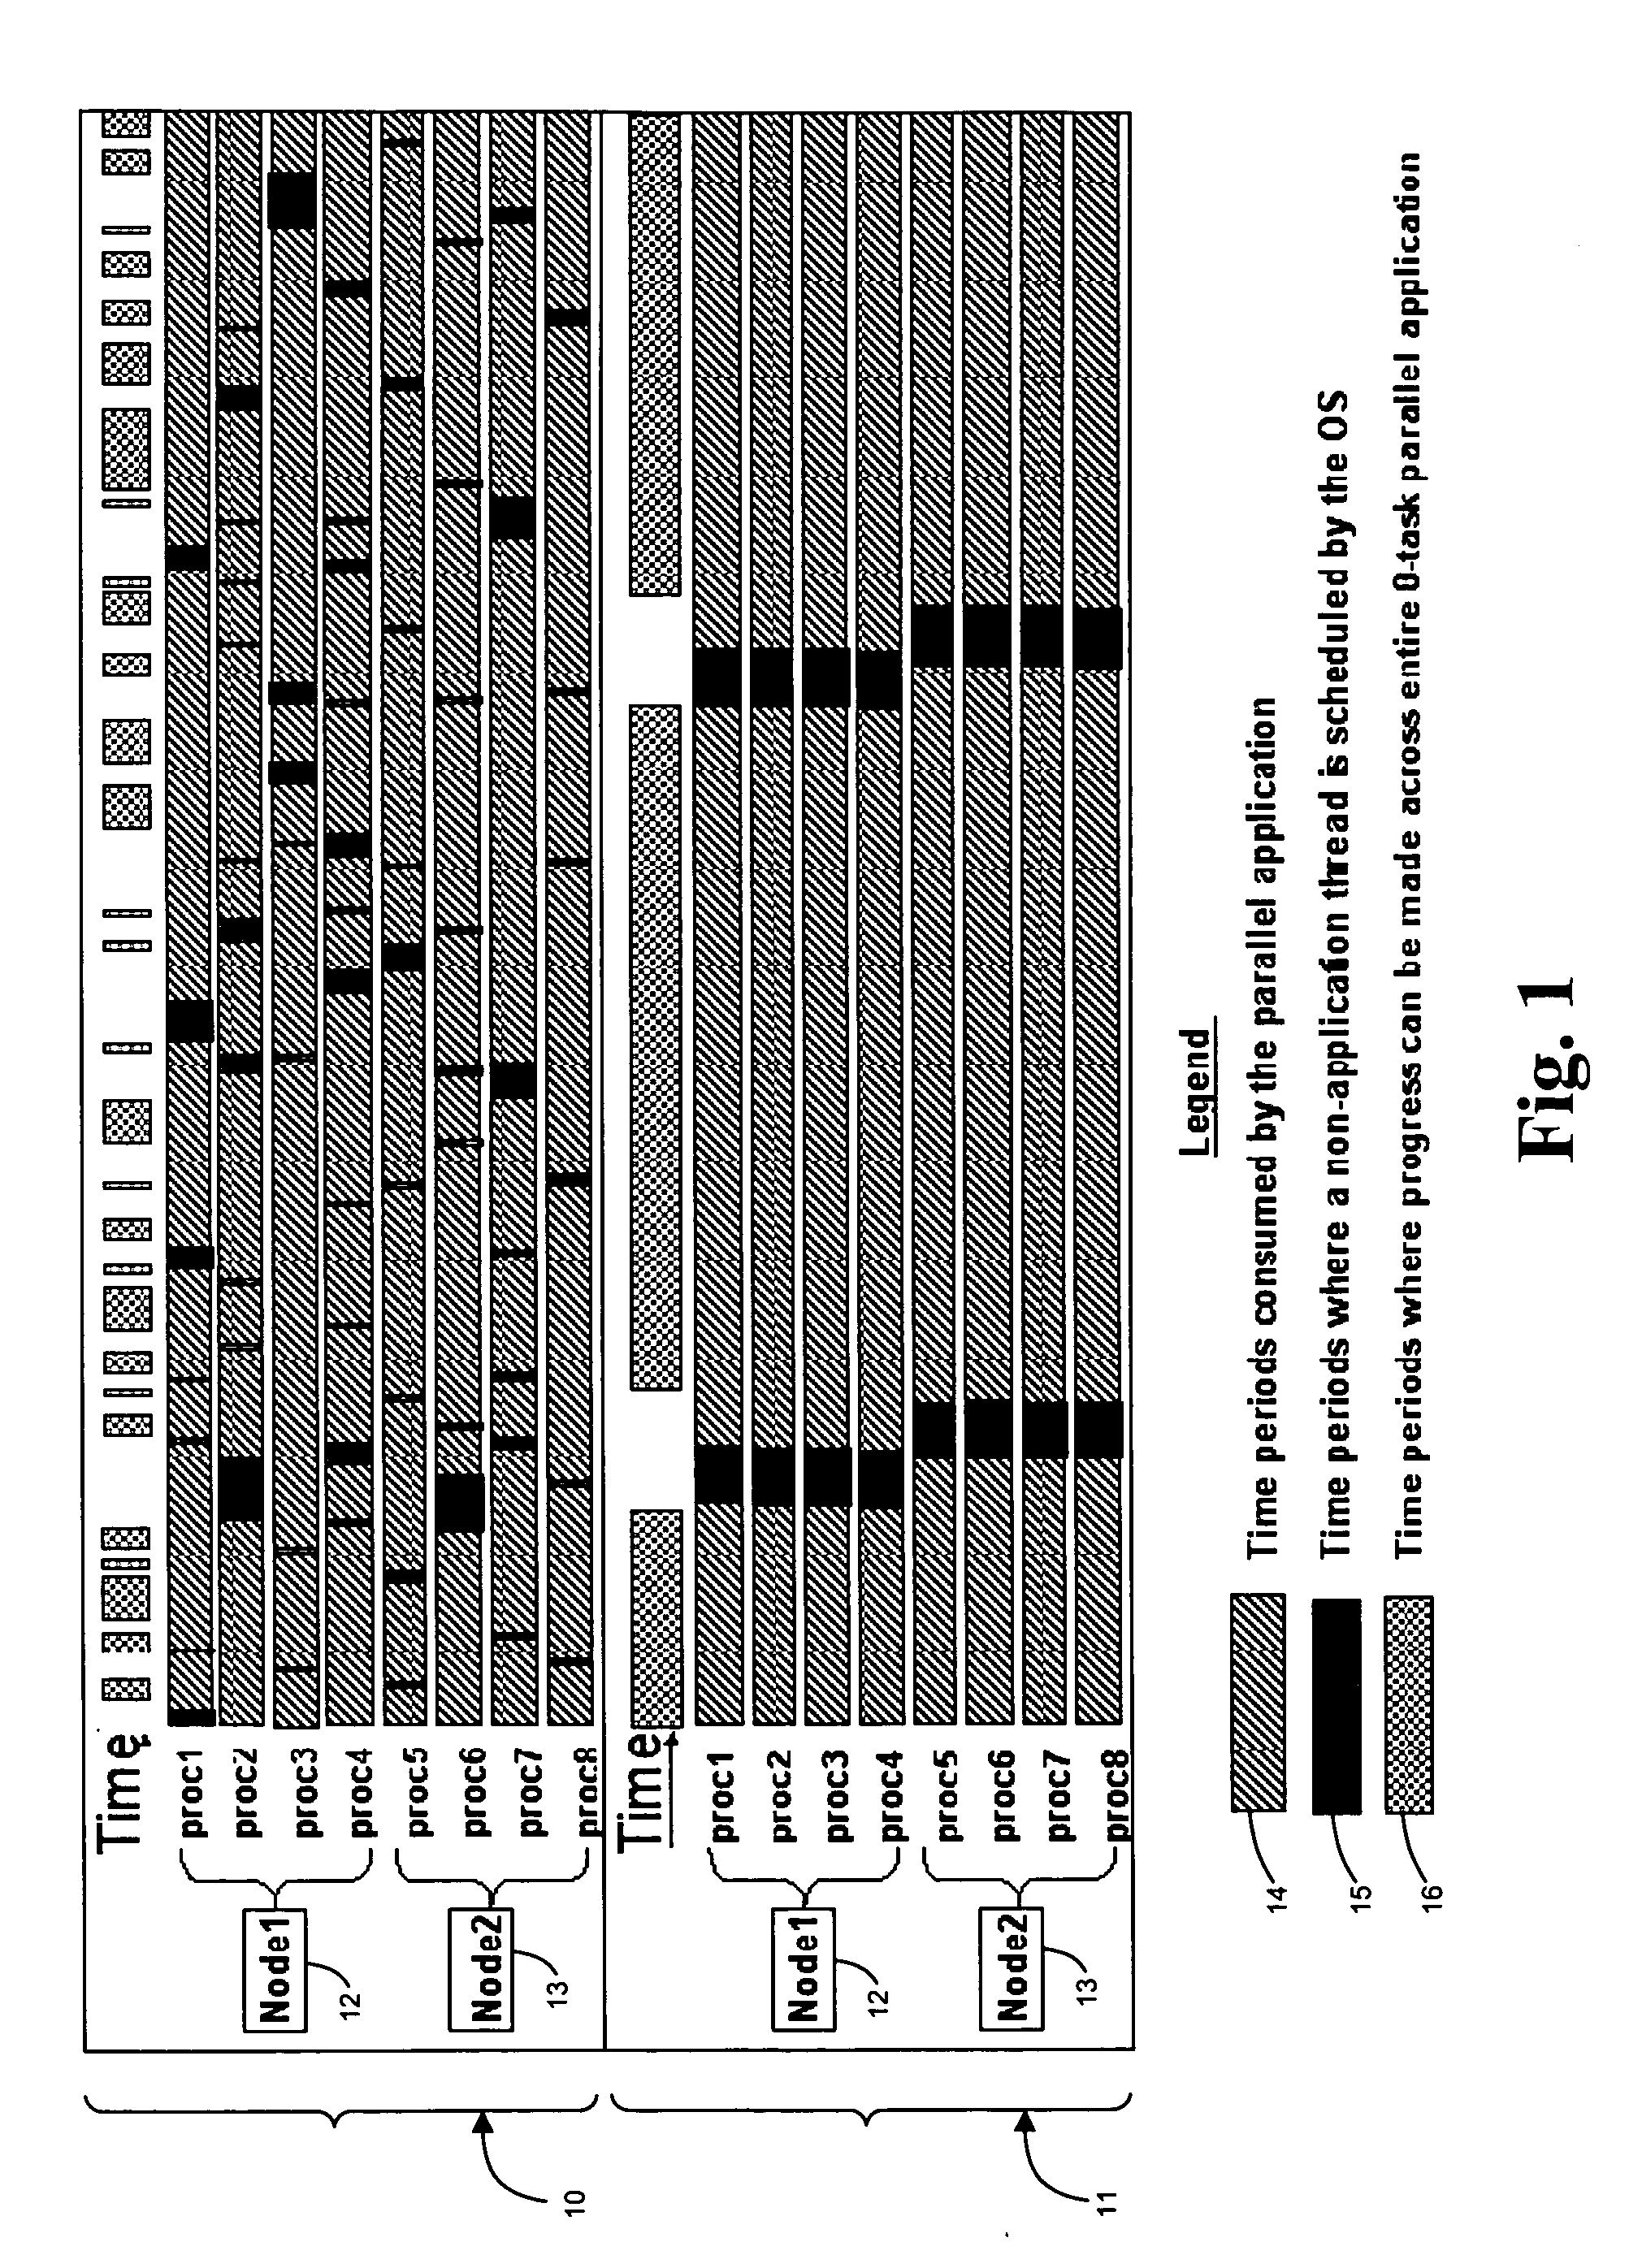 Parallel-aware, dedicated job co-scheduling method and system